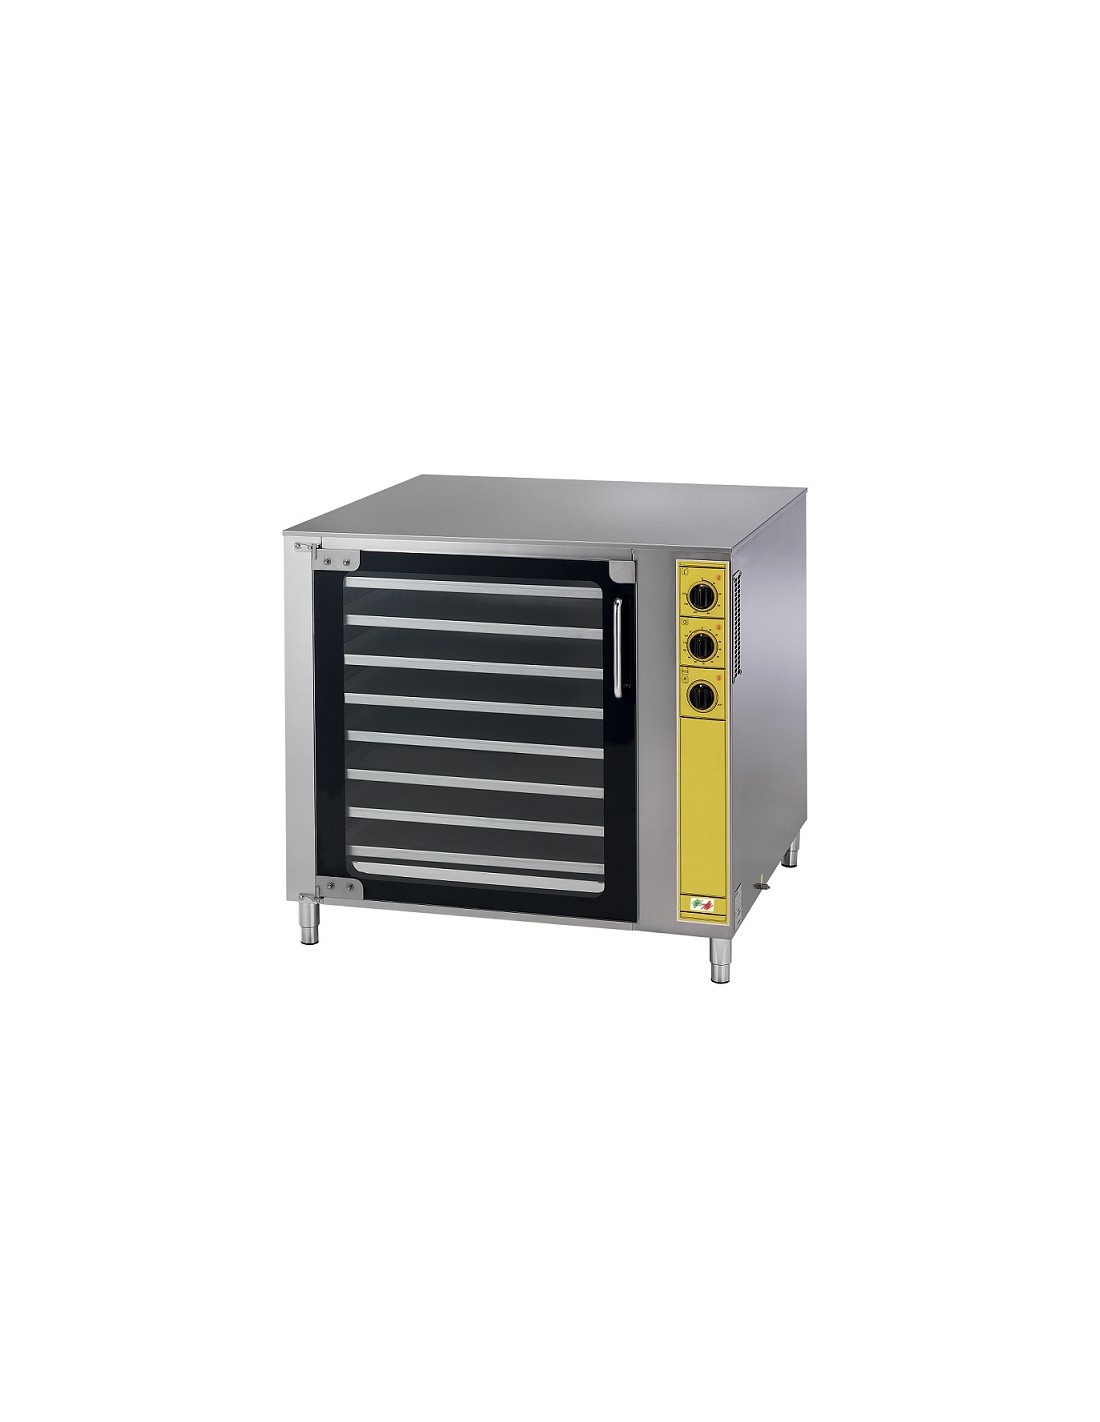 Prover - For pastry - Capacity 10 trays 40 x 60 cm - Cm 97 x 83.5 x 72 h